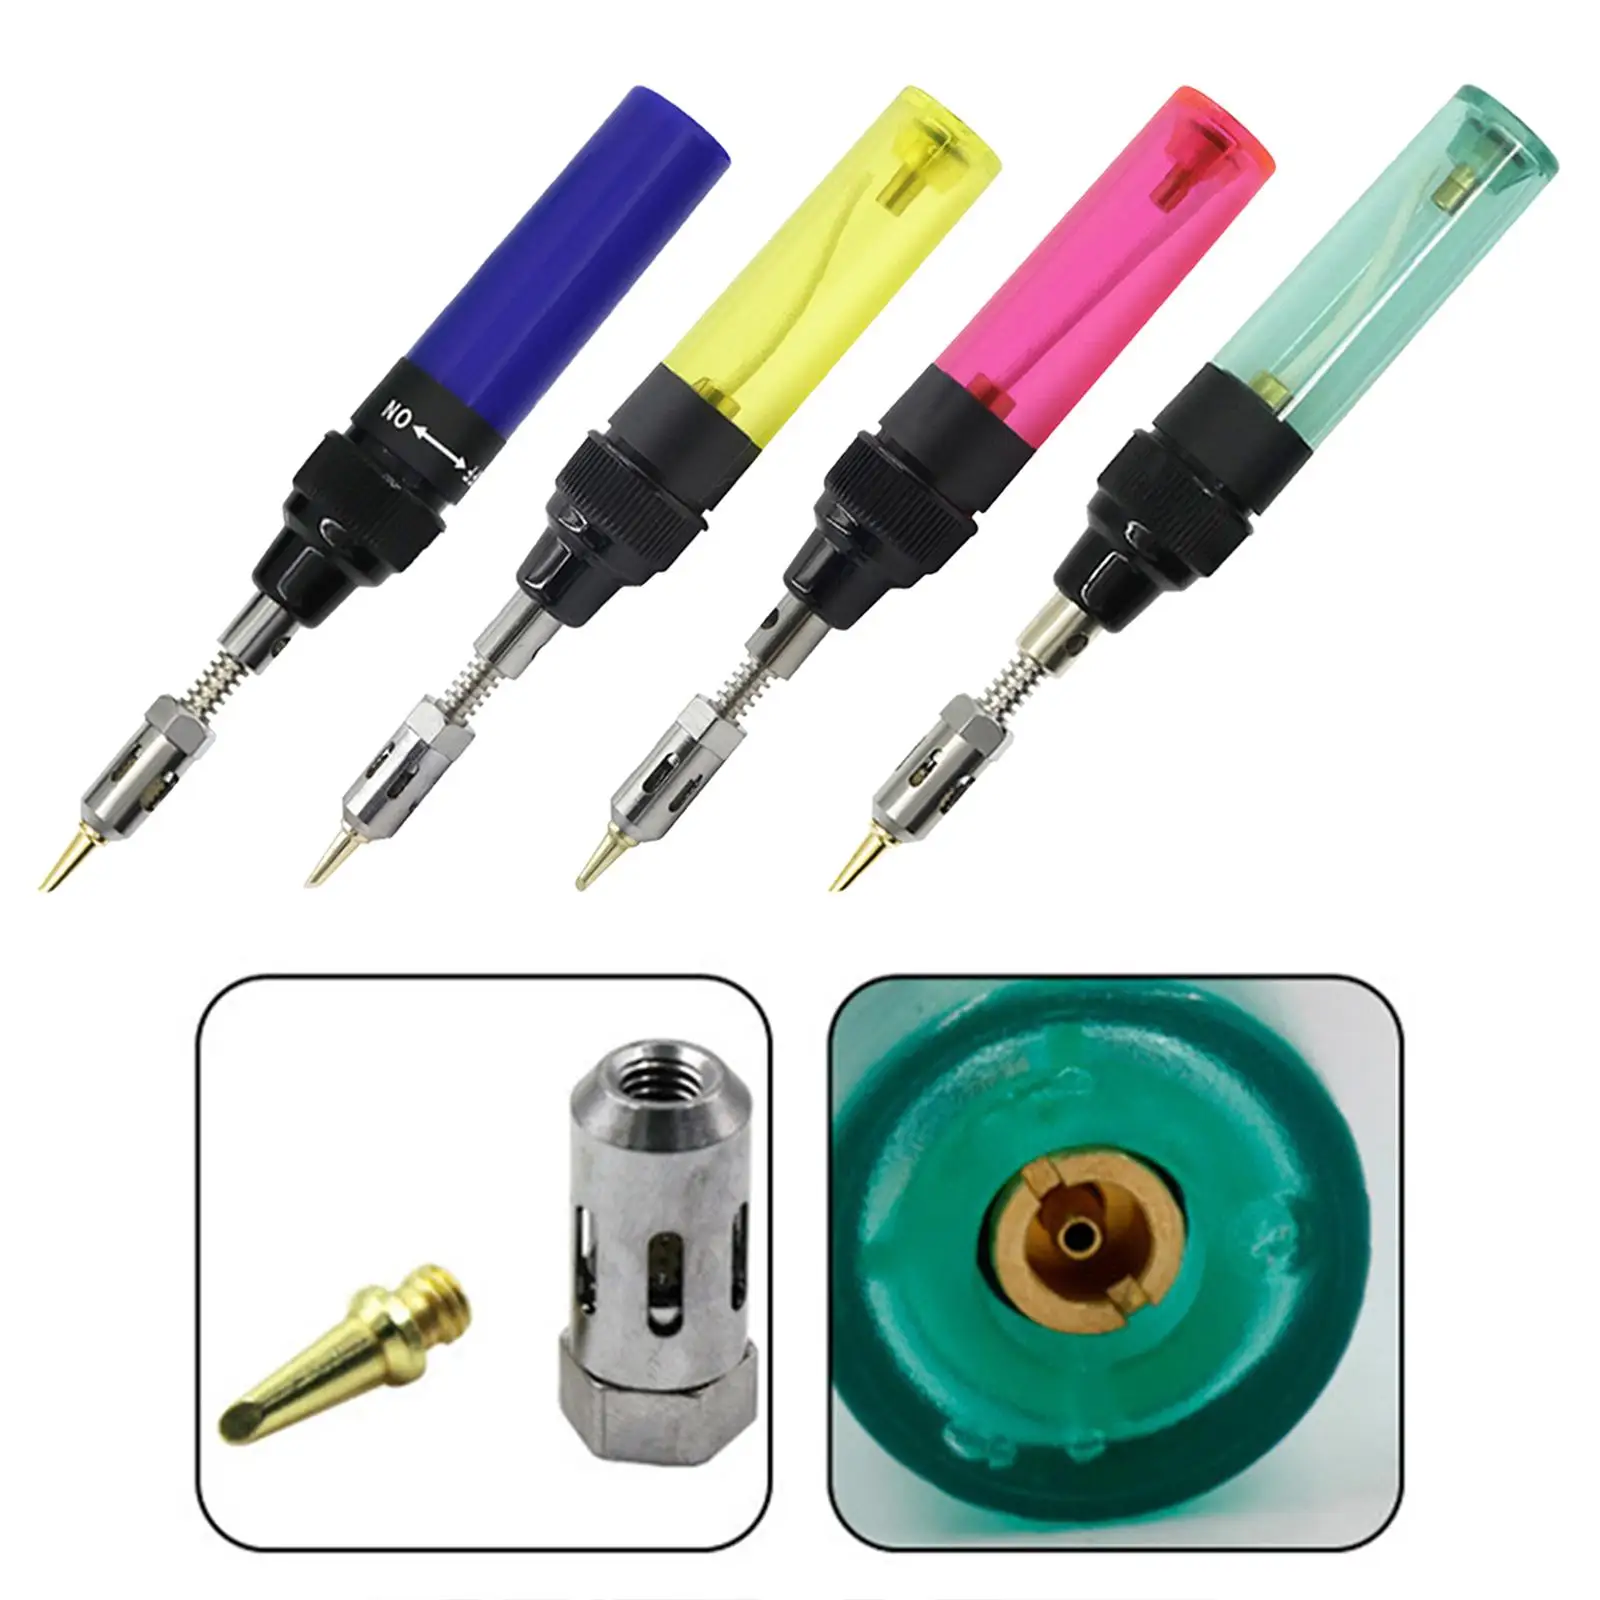 3 in 1 Gas Soldering Solder Iron Welding Torch, Easy to Refill, Soldering Iron